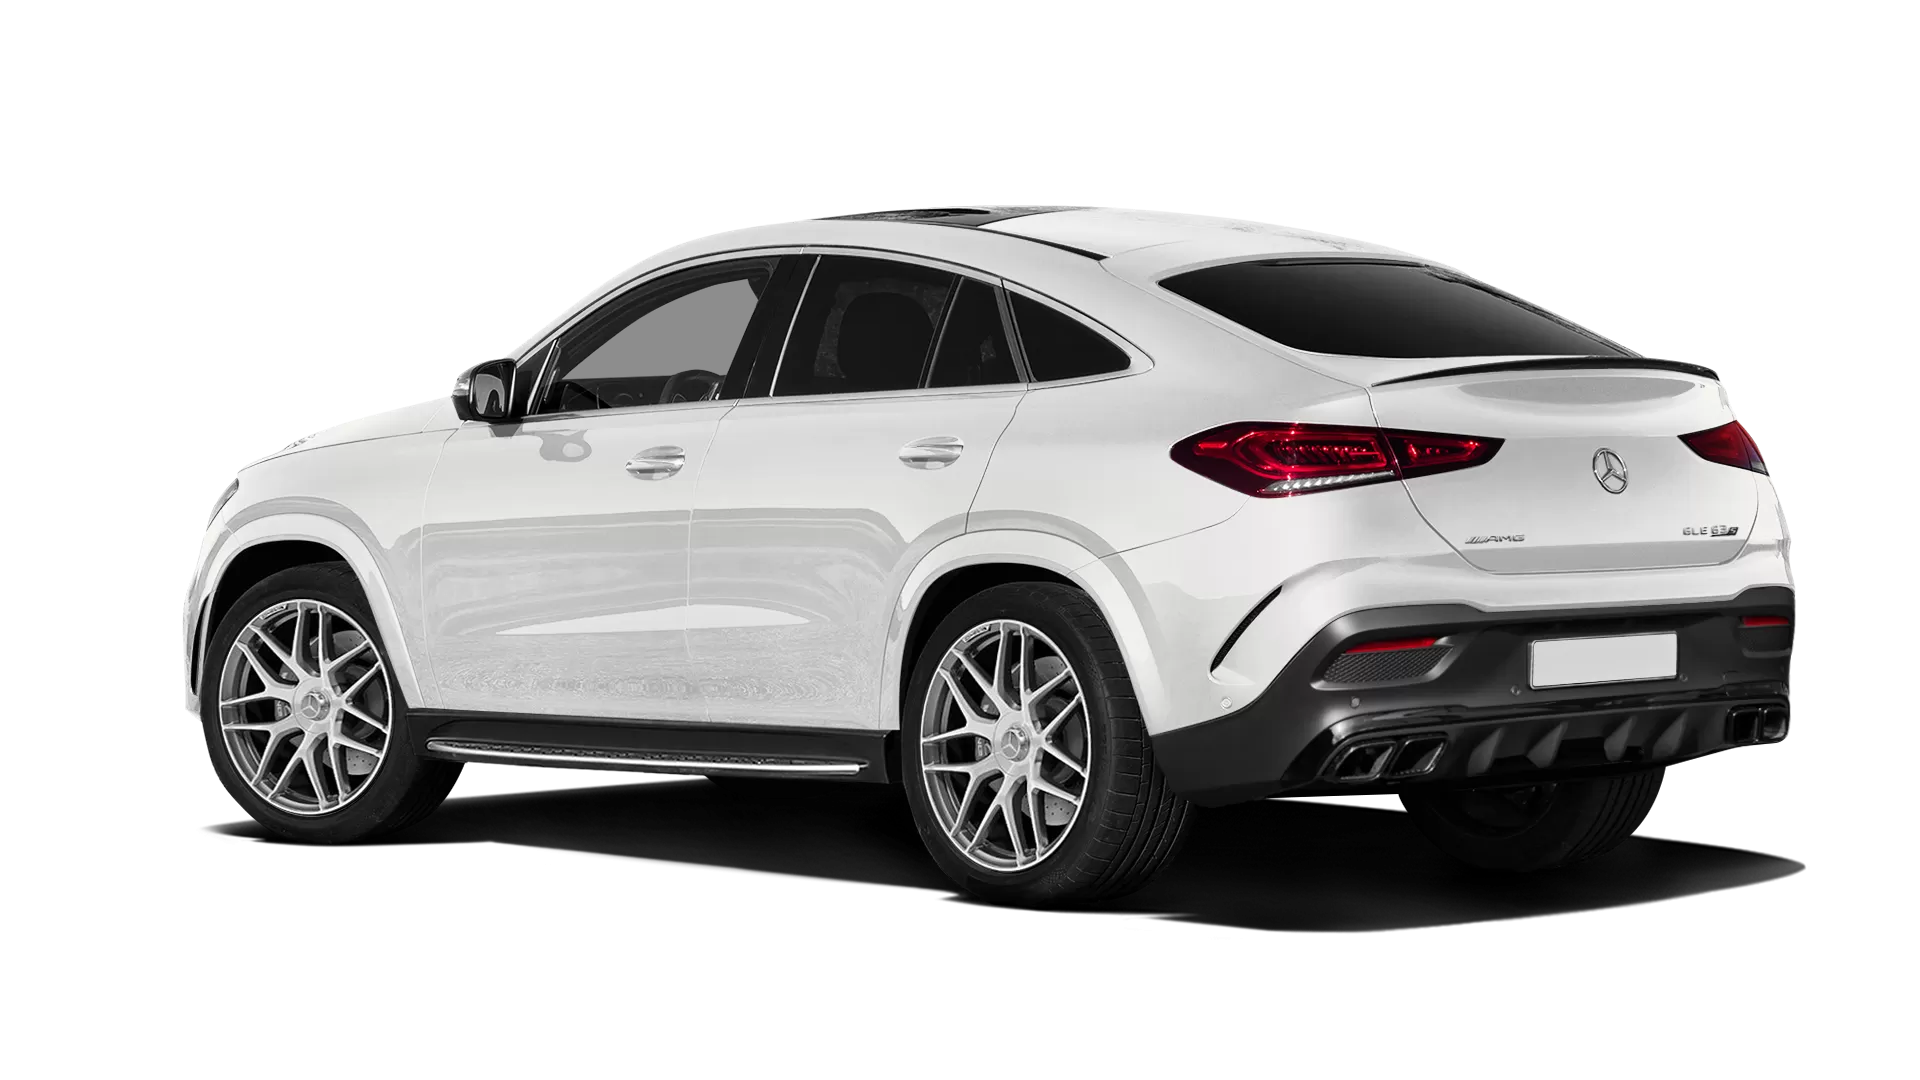 Mercedes GLE Coupe AMG 63 C167 stock rear view in Diamond White color